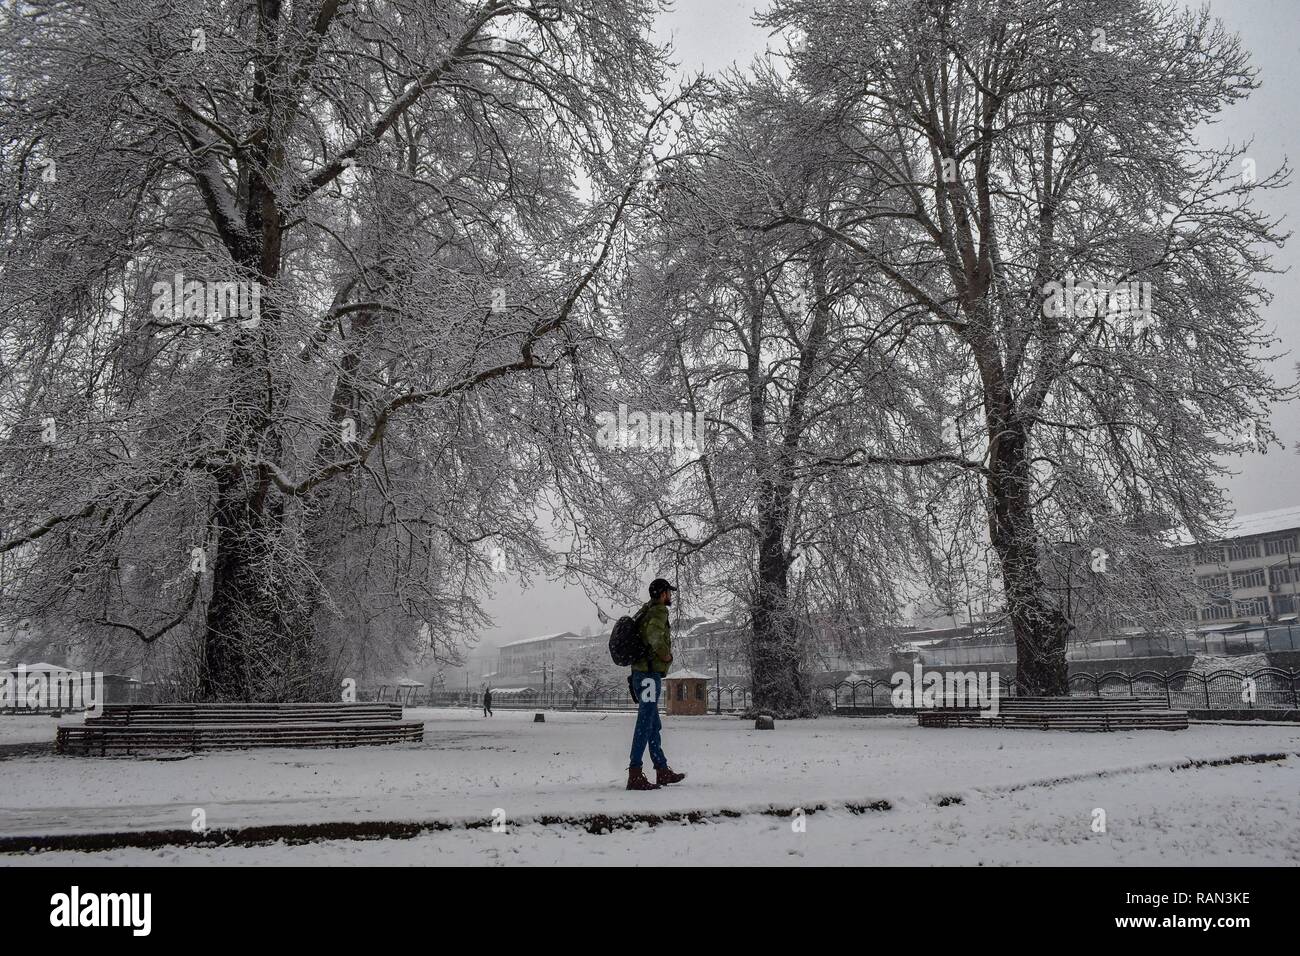 A Kashmiri boy seen walking through a snow covered garden during snowfall. Kashmir received its first snowfall of the new year, breaking a month-long dry spell in the Valley. Srinagar recorded a 0 degrees Celsius -- an increase of over four degrees from minus 4.2 degrees Celsius on the previous, the Met department said. The weather department has predicted more snowfall in Kashmir over the next three days. Stock Photo